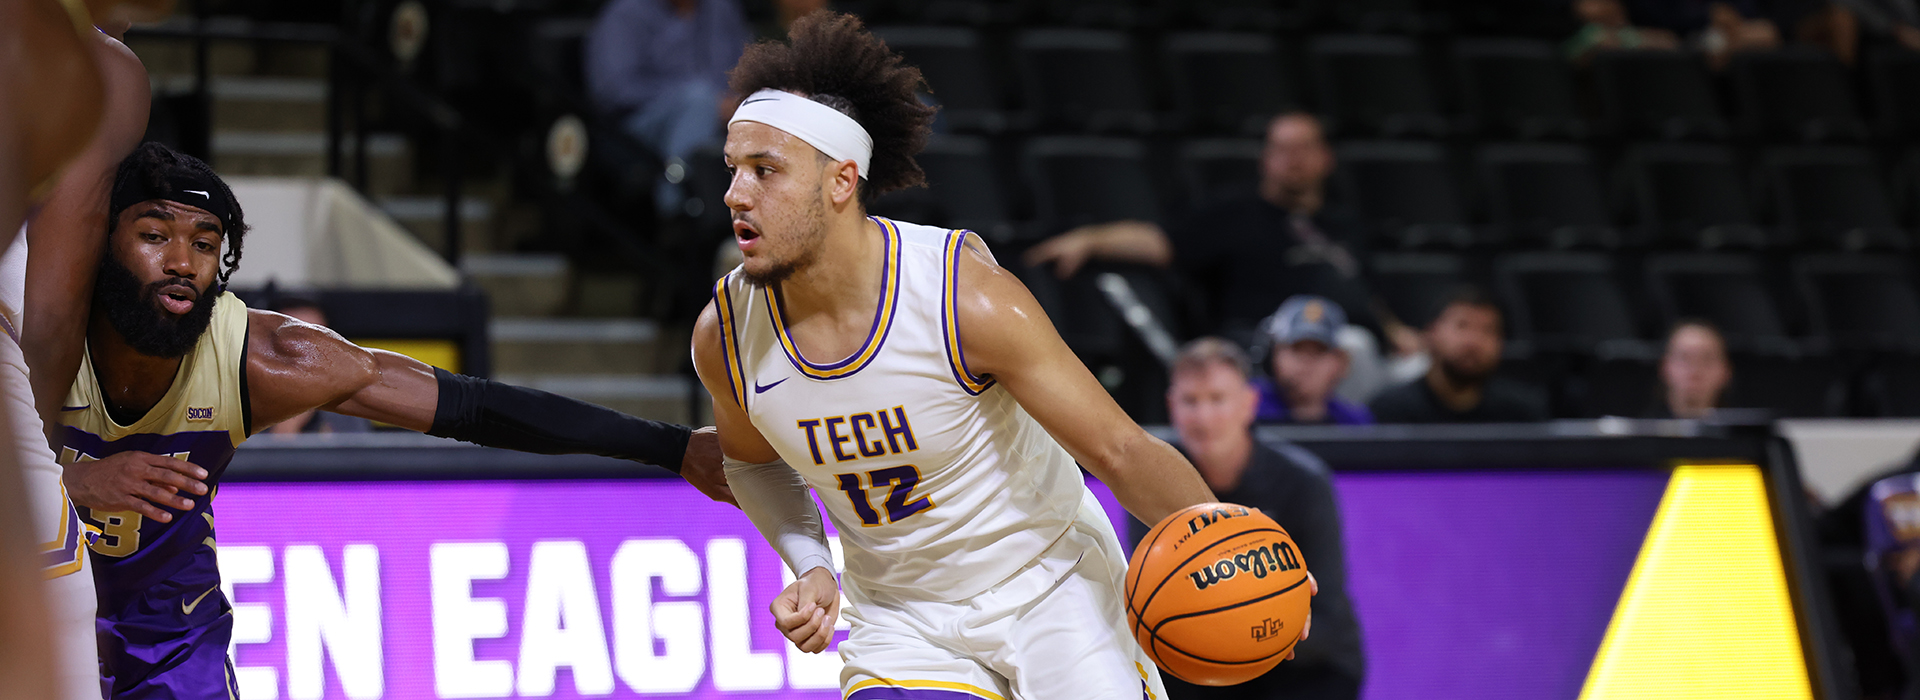 Tech squares off with Lindenwood for first time in Saturday afternoon OVC tilt